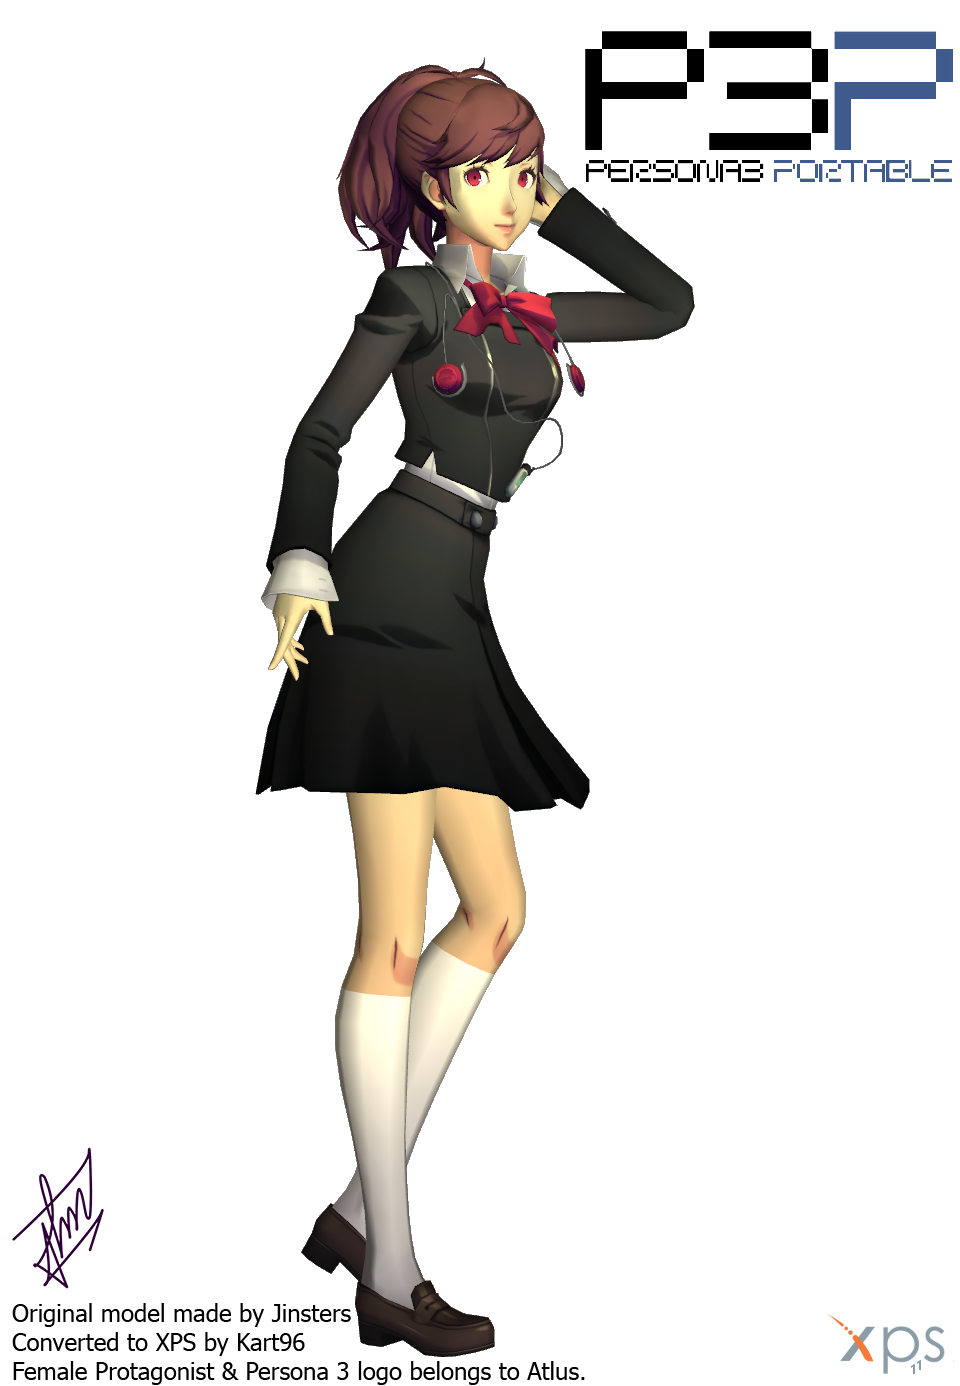 MOD Persona 3 DMN - Female MC SEES outfit XPS Upd by kart96 on DeviantArt